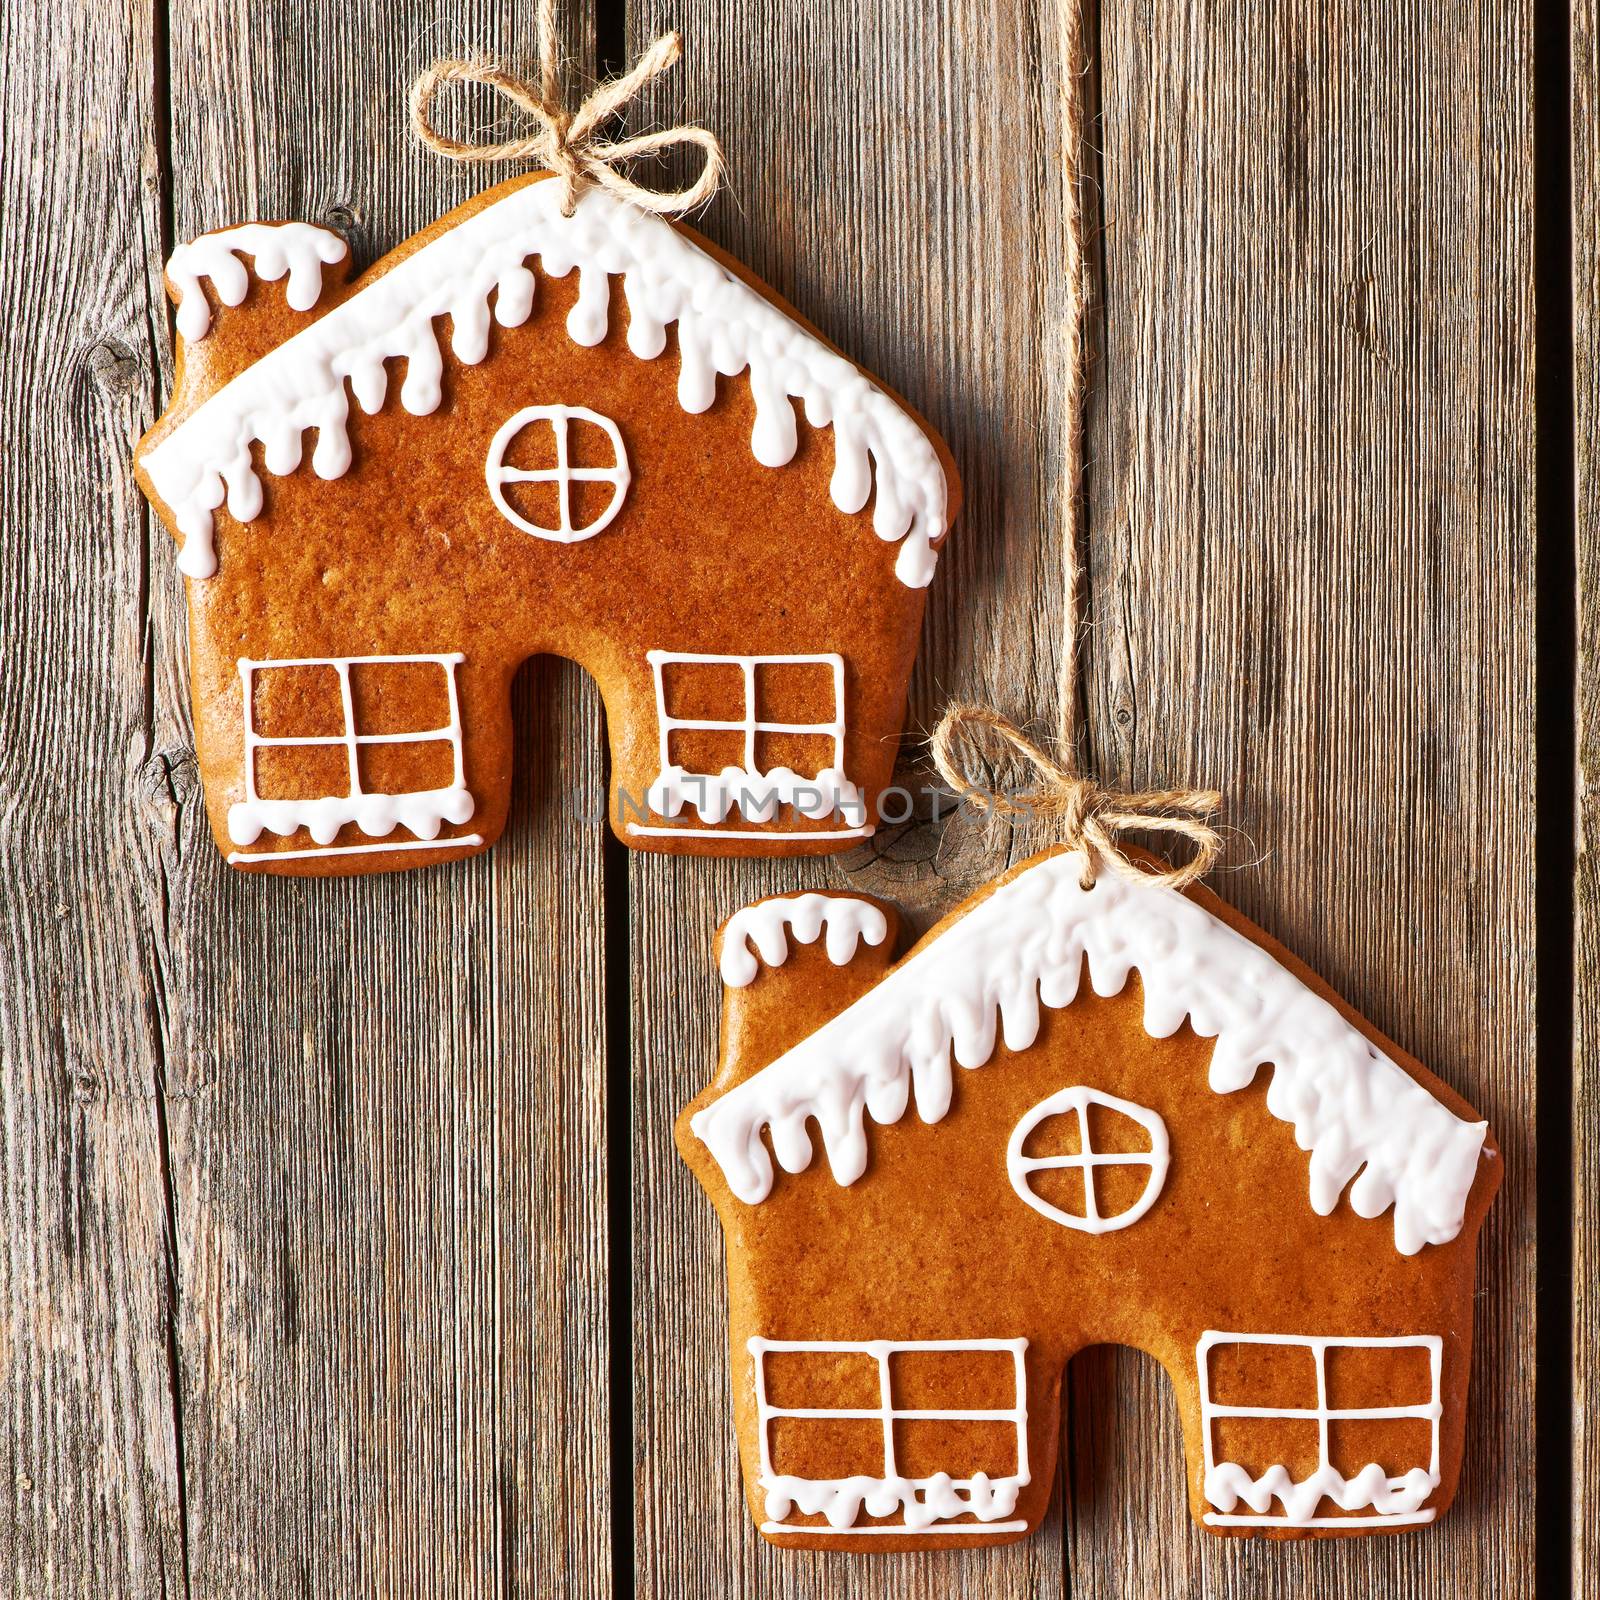 Christmas homemade gingerbread house cookies by haveseen